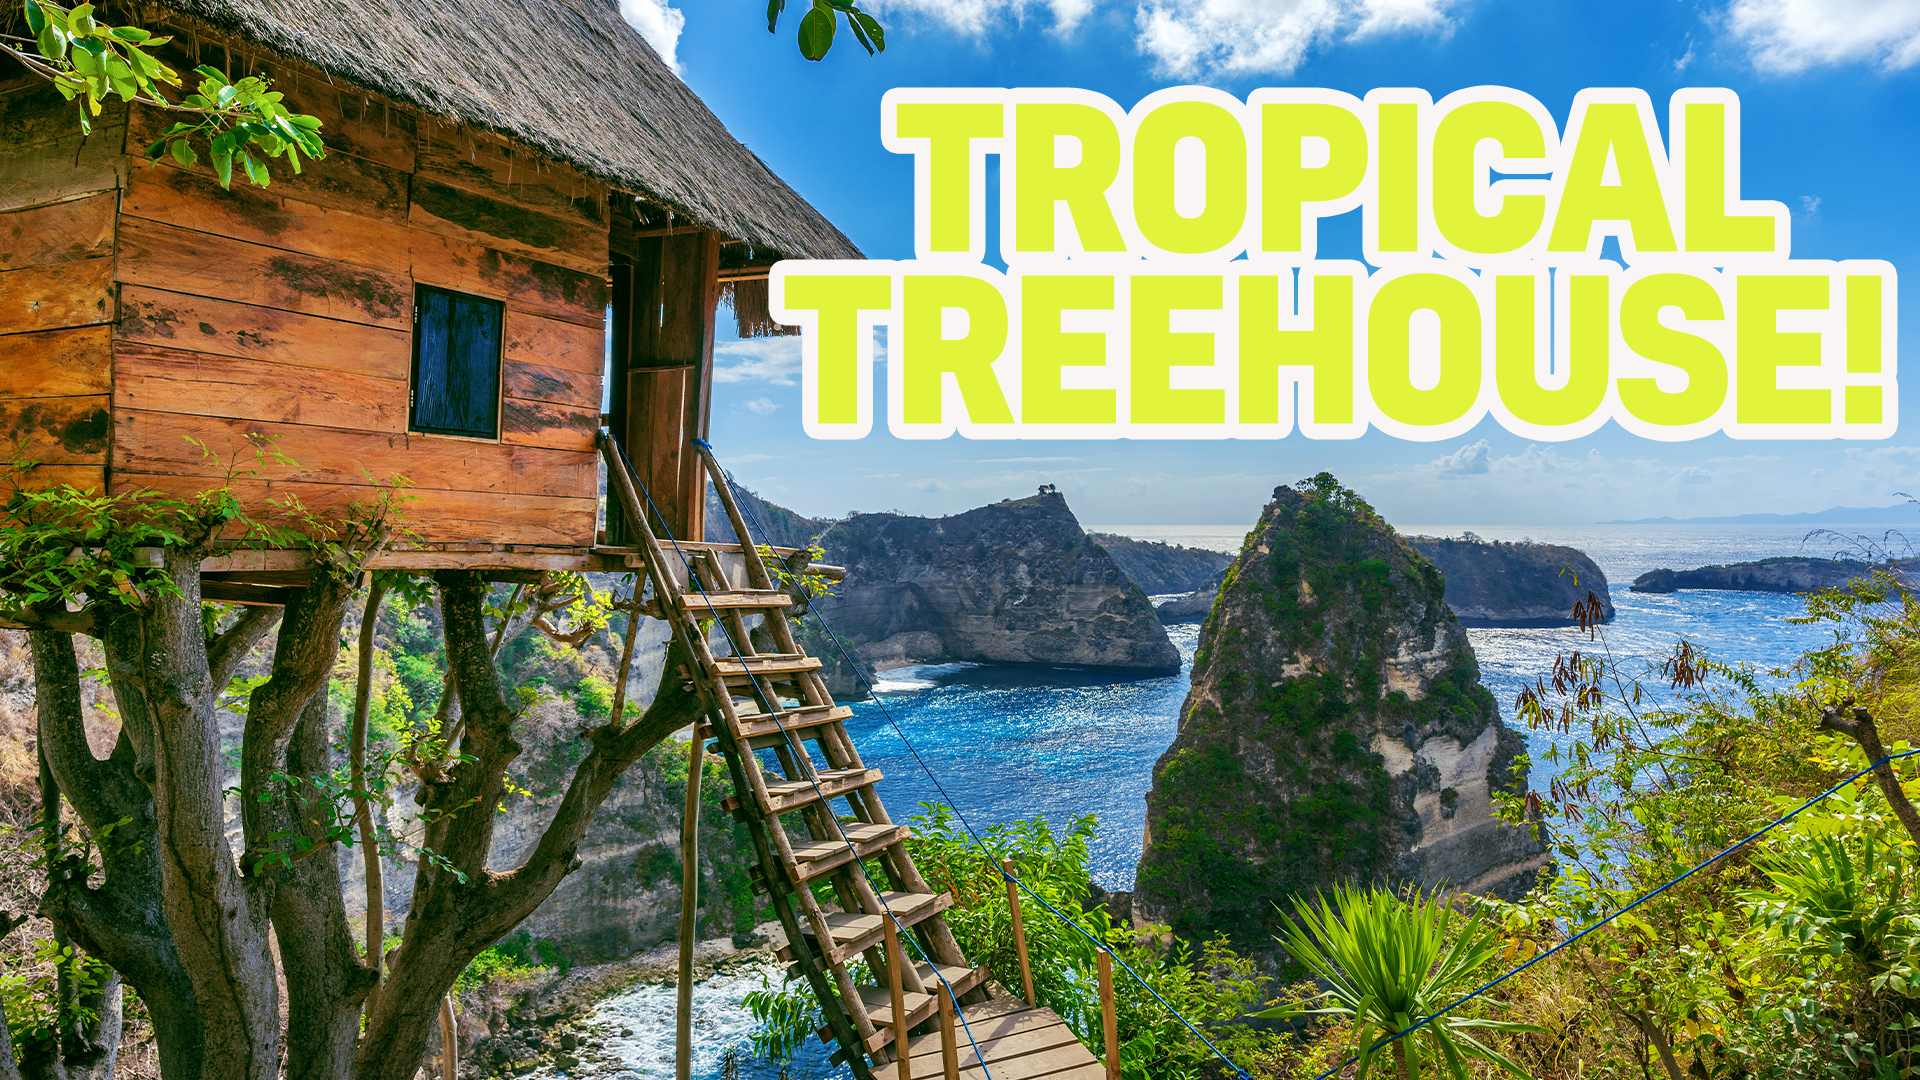 Result: Tropical treehouse